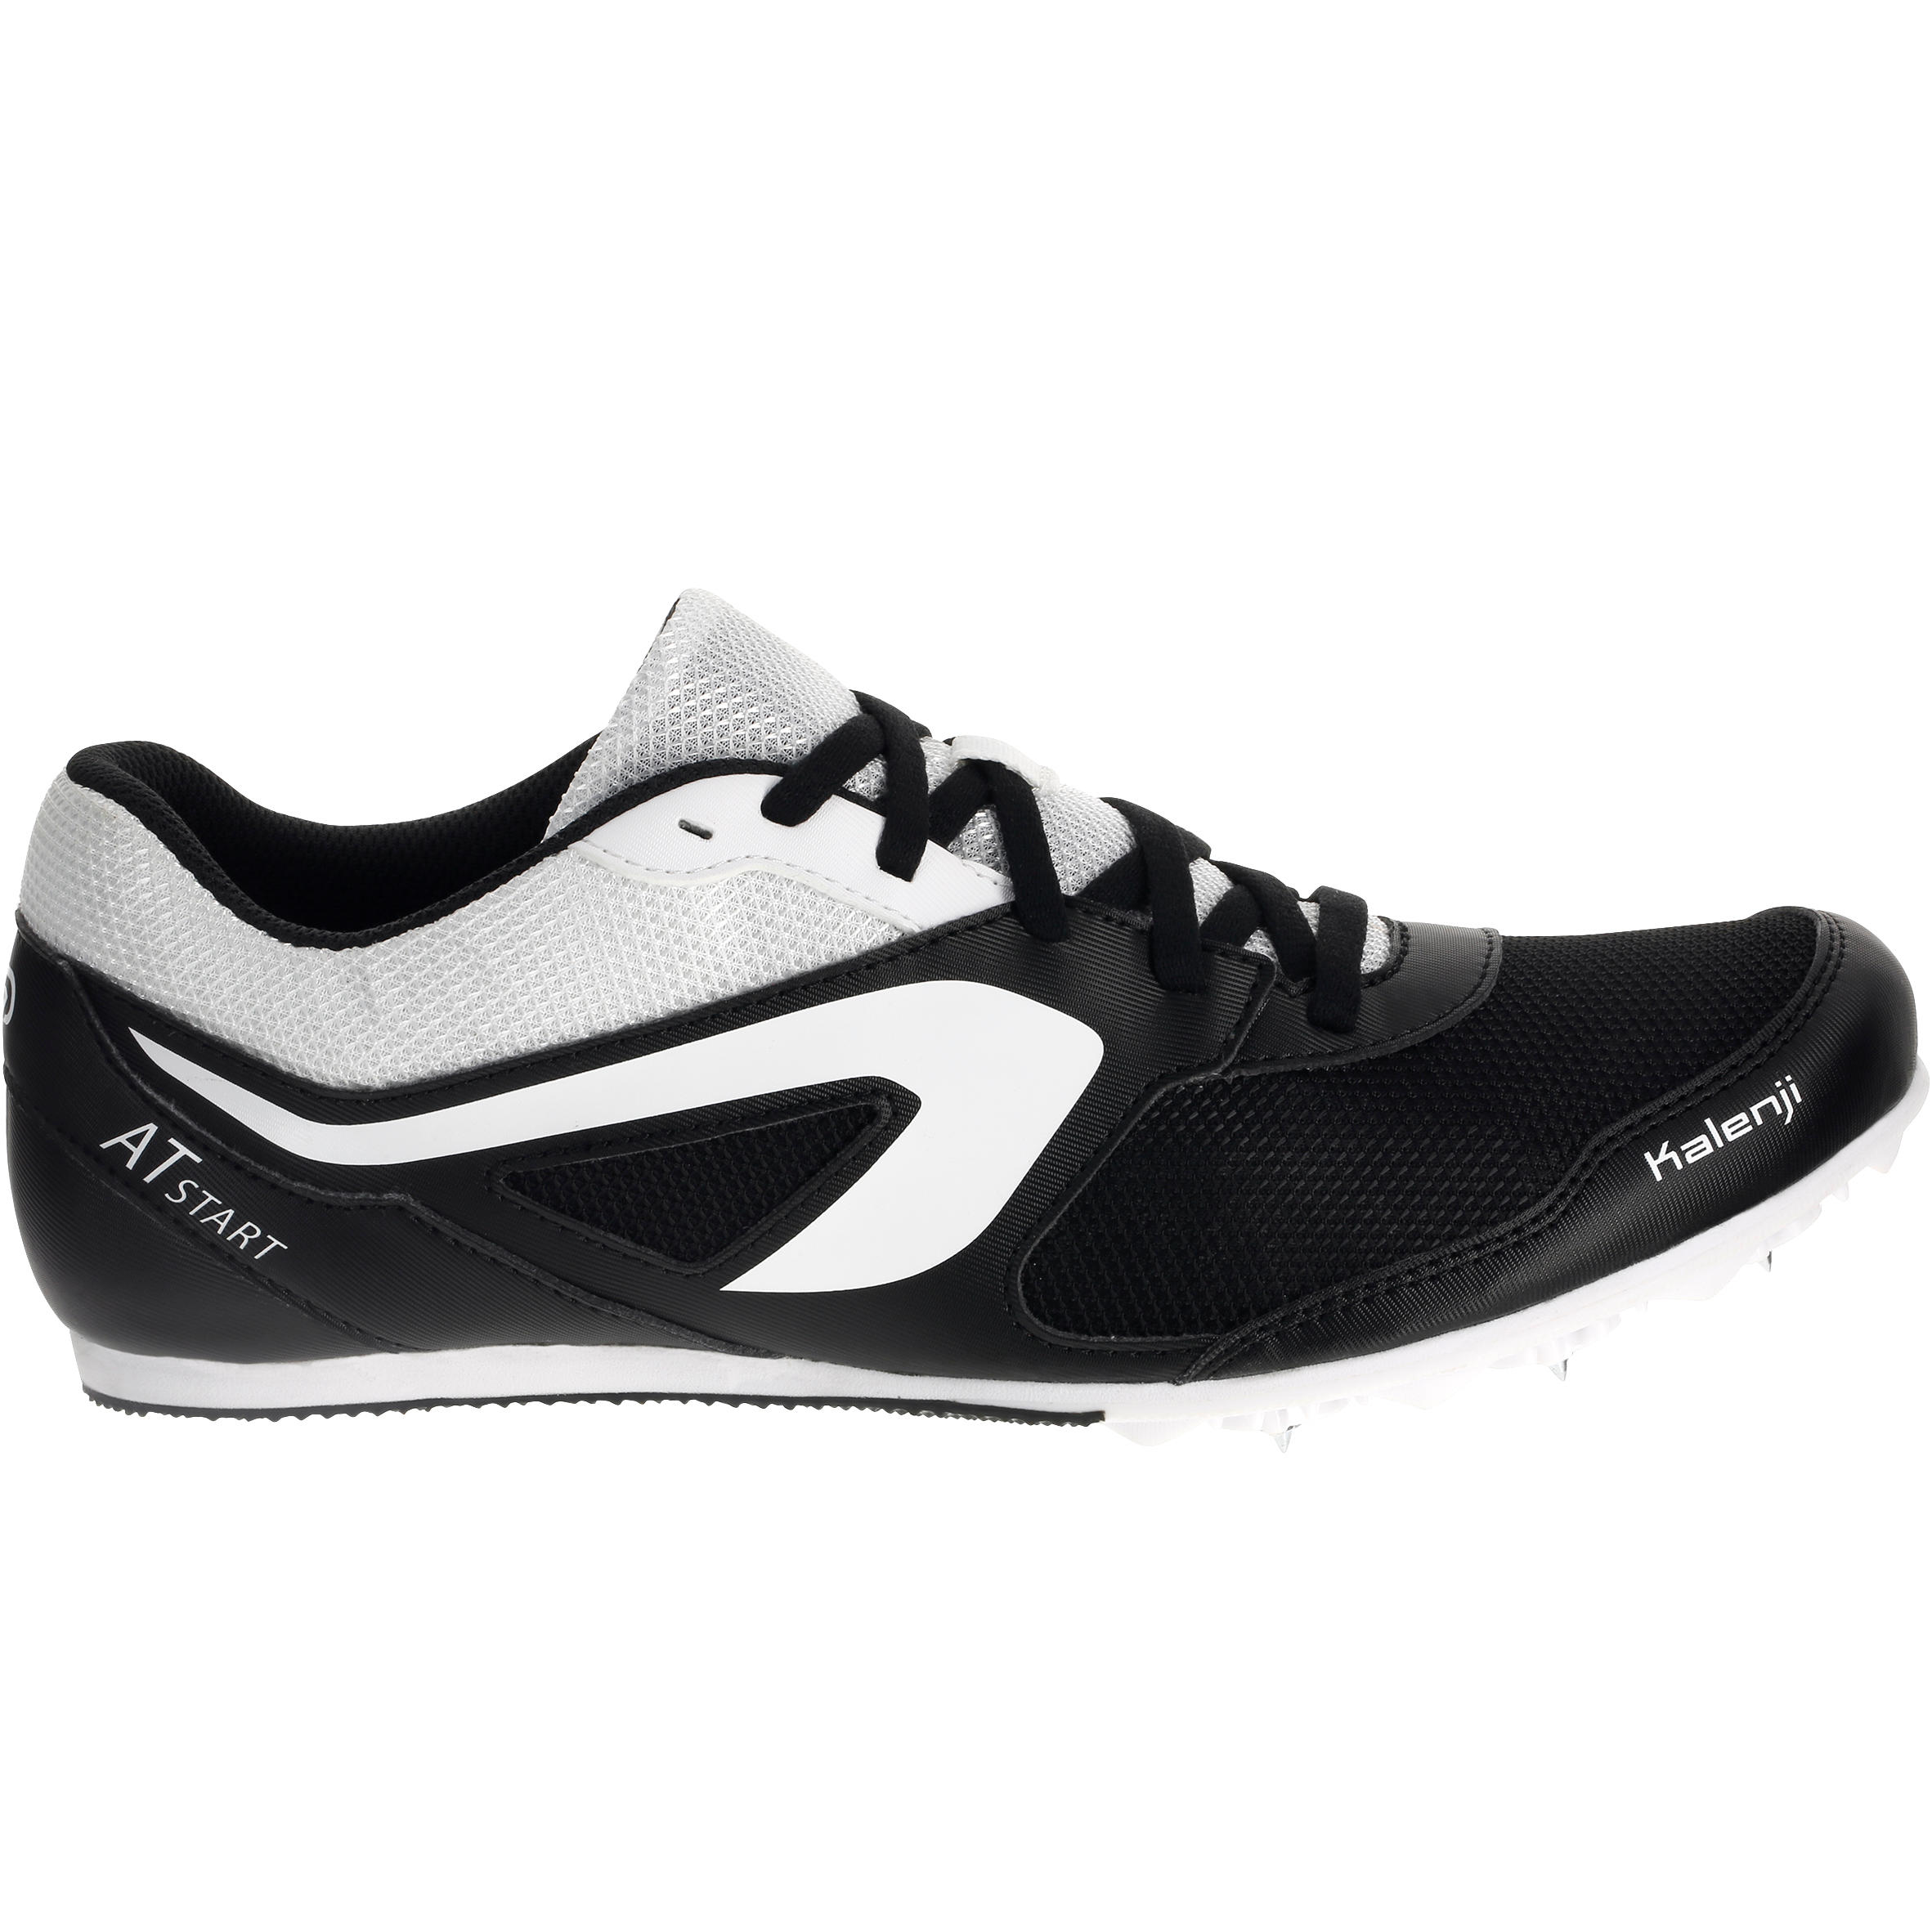 ATHLETICS TRAINERS WITH SPIKES BLACK WHITE 2/18